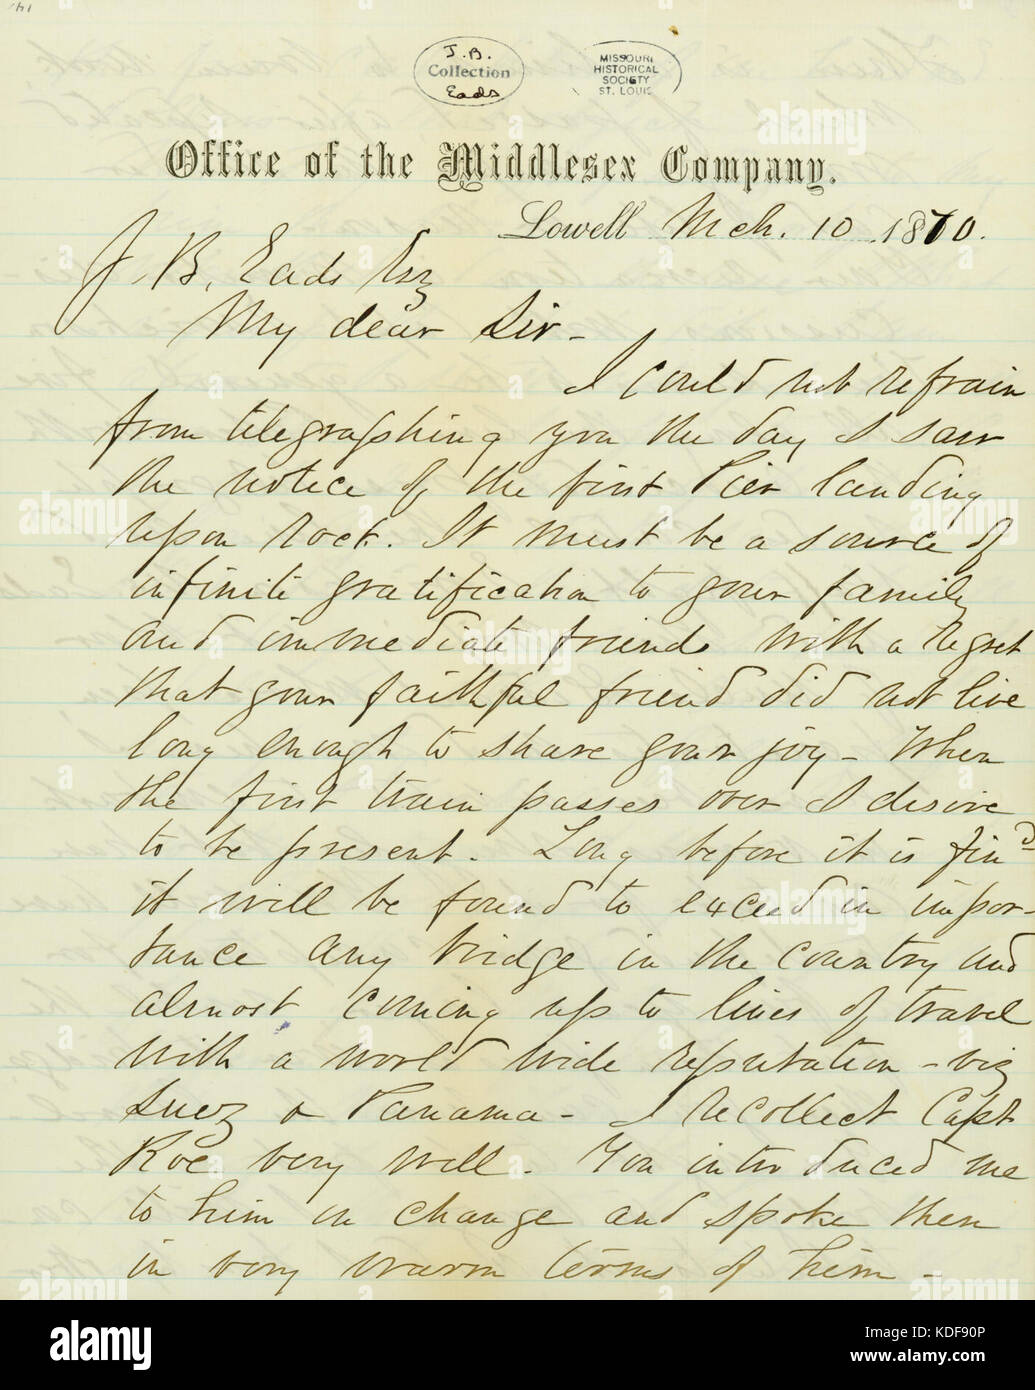 Letter signed G.V. Fox, Office of the Middlesex Company, Lowell, to J.B. Eads, March 10, 1870 Stock Photo